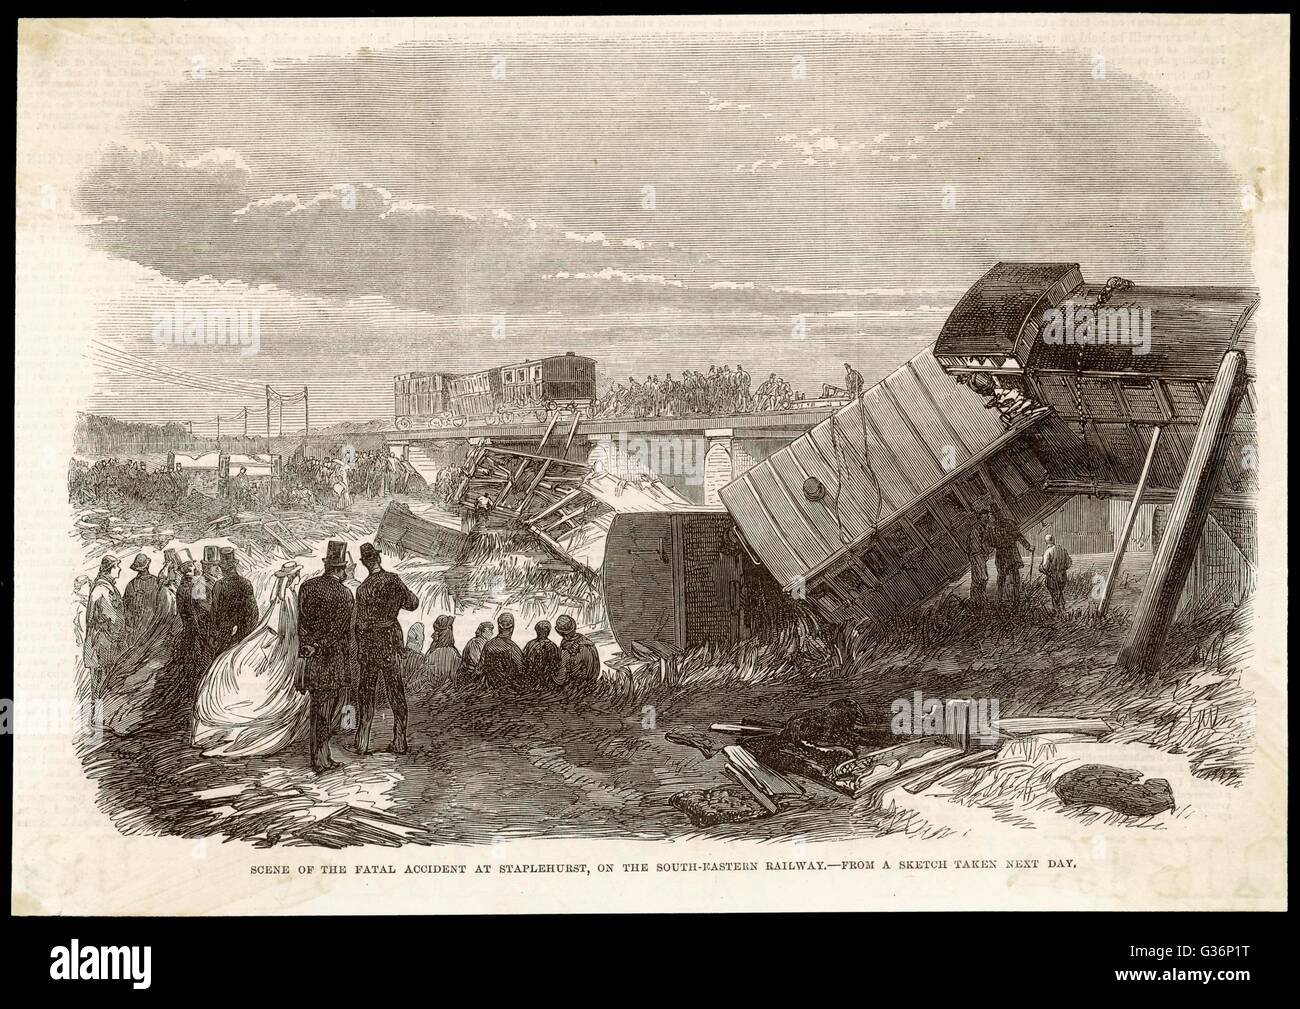 A railway accident at Staplehurst, Kent.  The accident happened when the boat train from Folkestone (South-Eastern Railway) derailed on a defective line, killing ten people and injuring 40.  Charles Dickens, Ellen Ternan and her mother escaped unhurt, tho Stock Photo